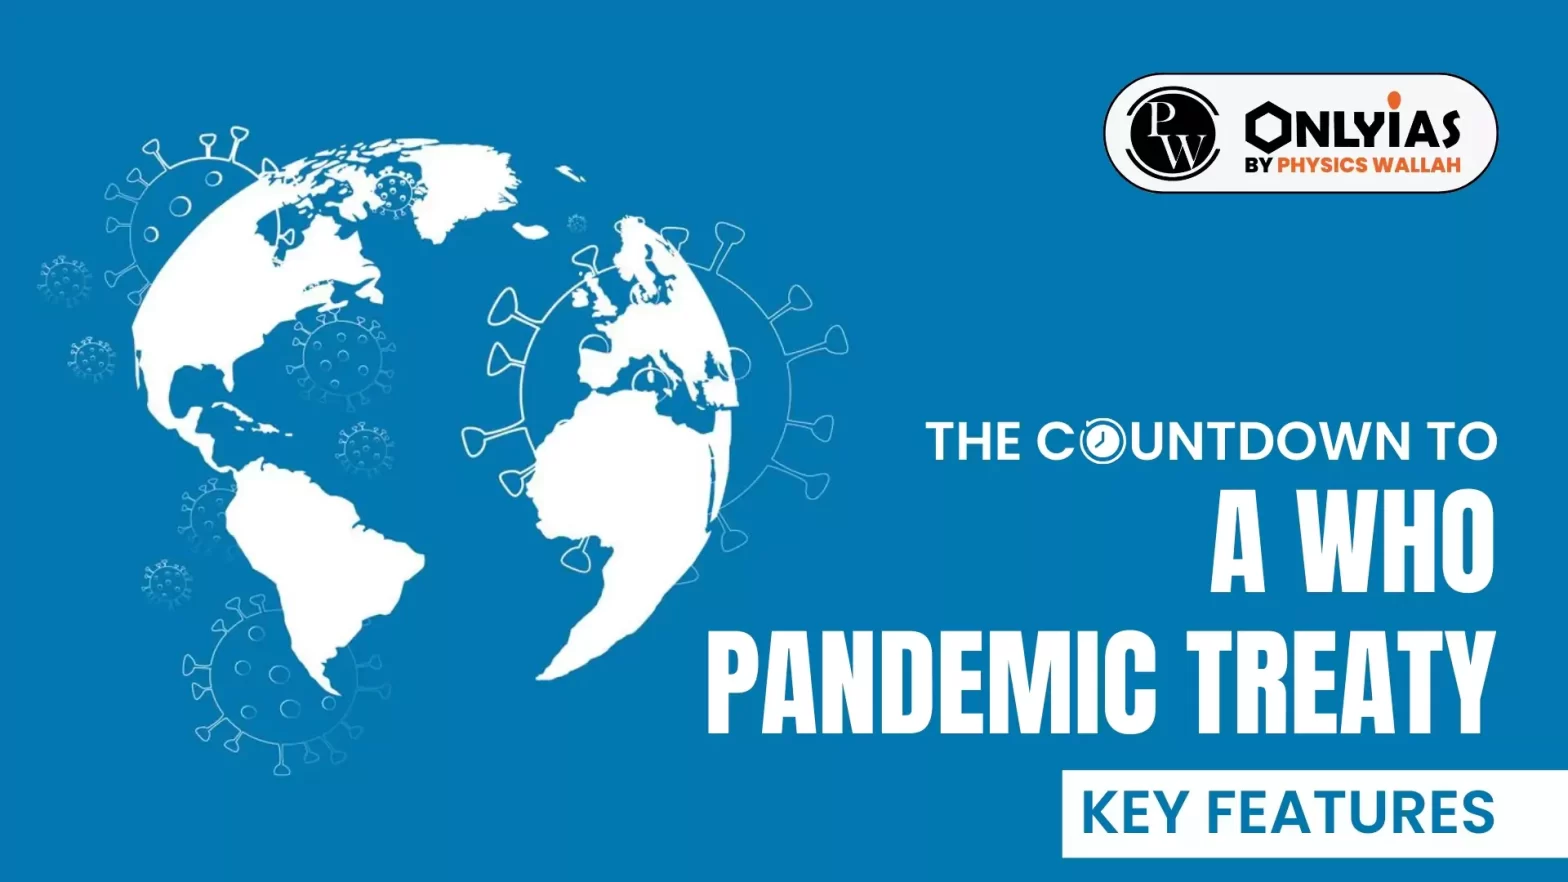 The Countdown to a WHO Pandemic Treaty: Key Features